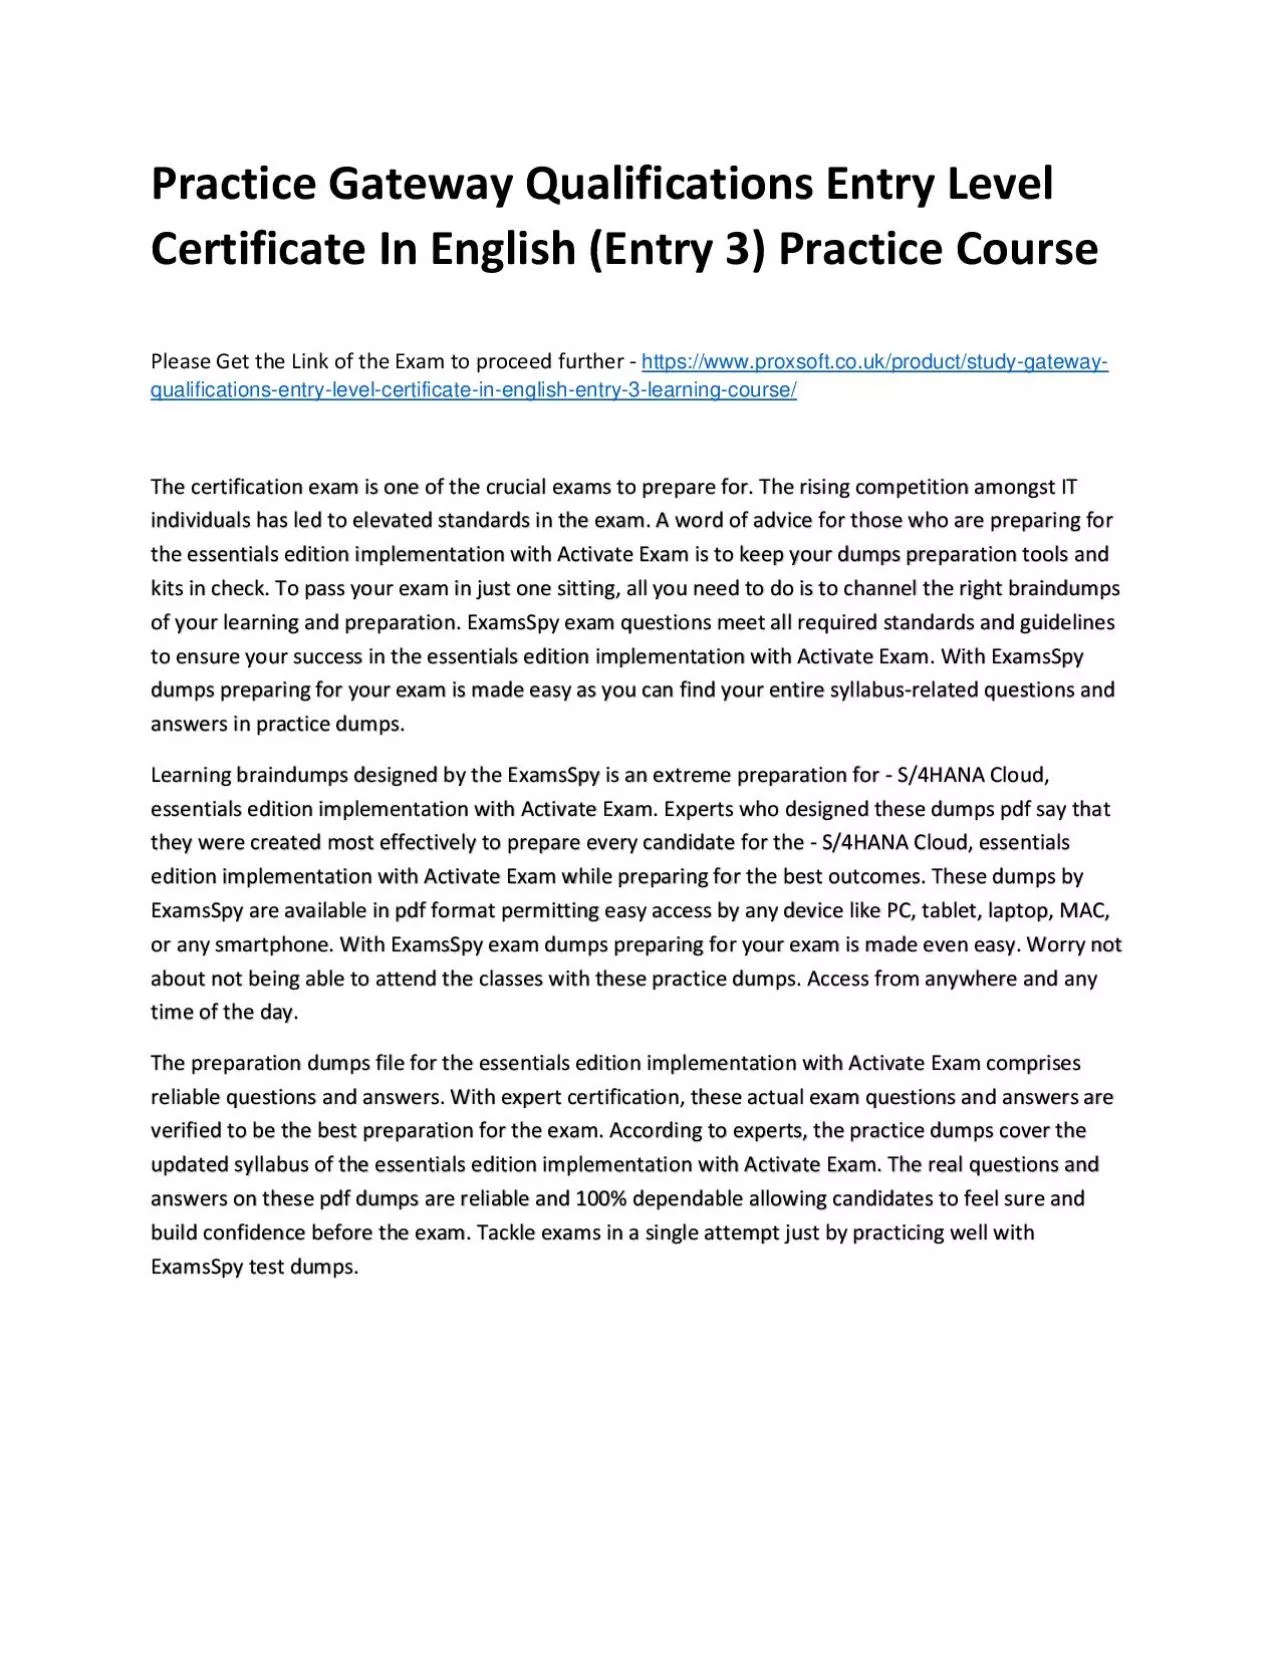 Practice Gateway Qualifications Entry Level Certificate In English (Entry 3) Practice